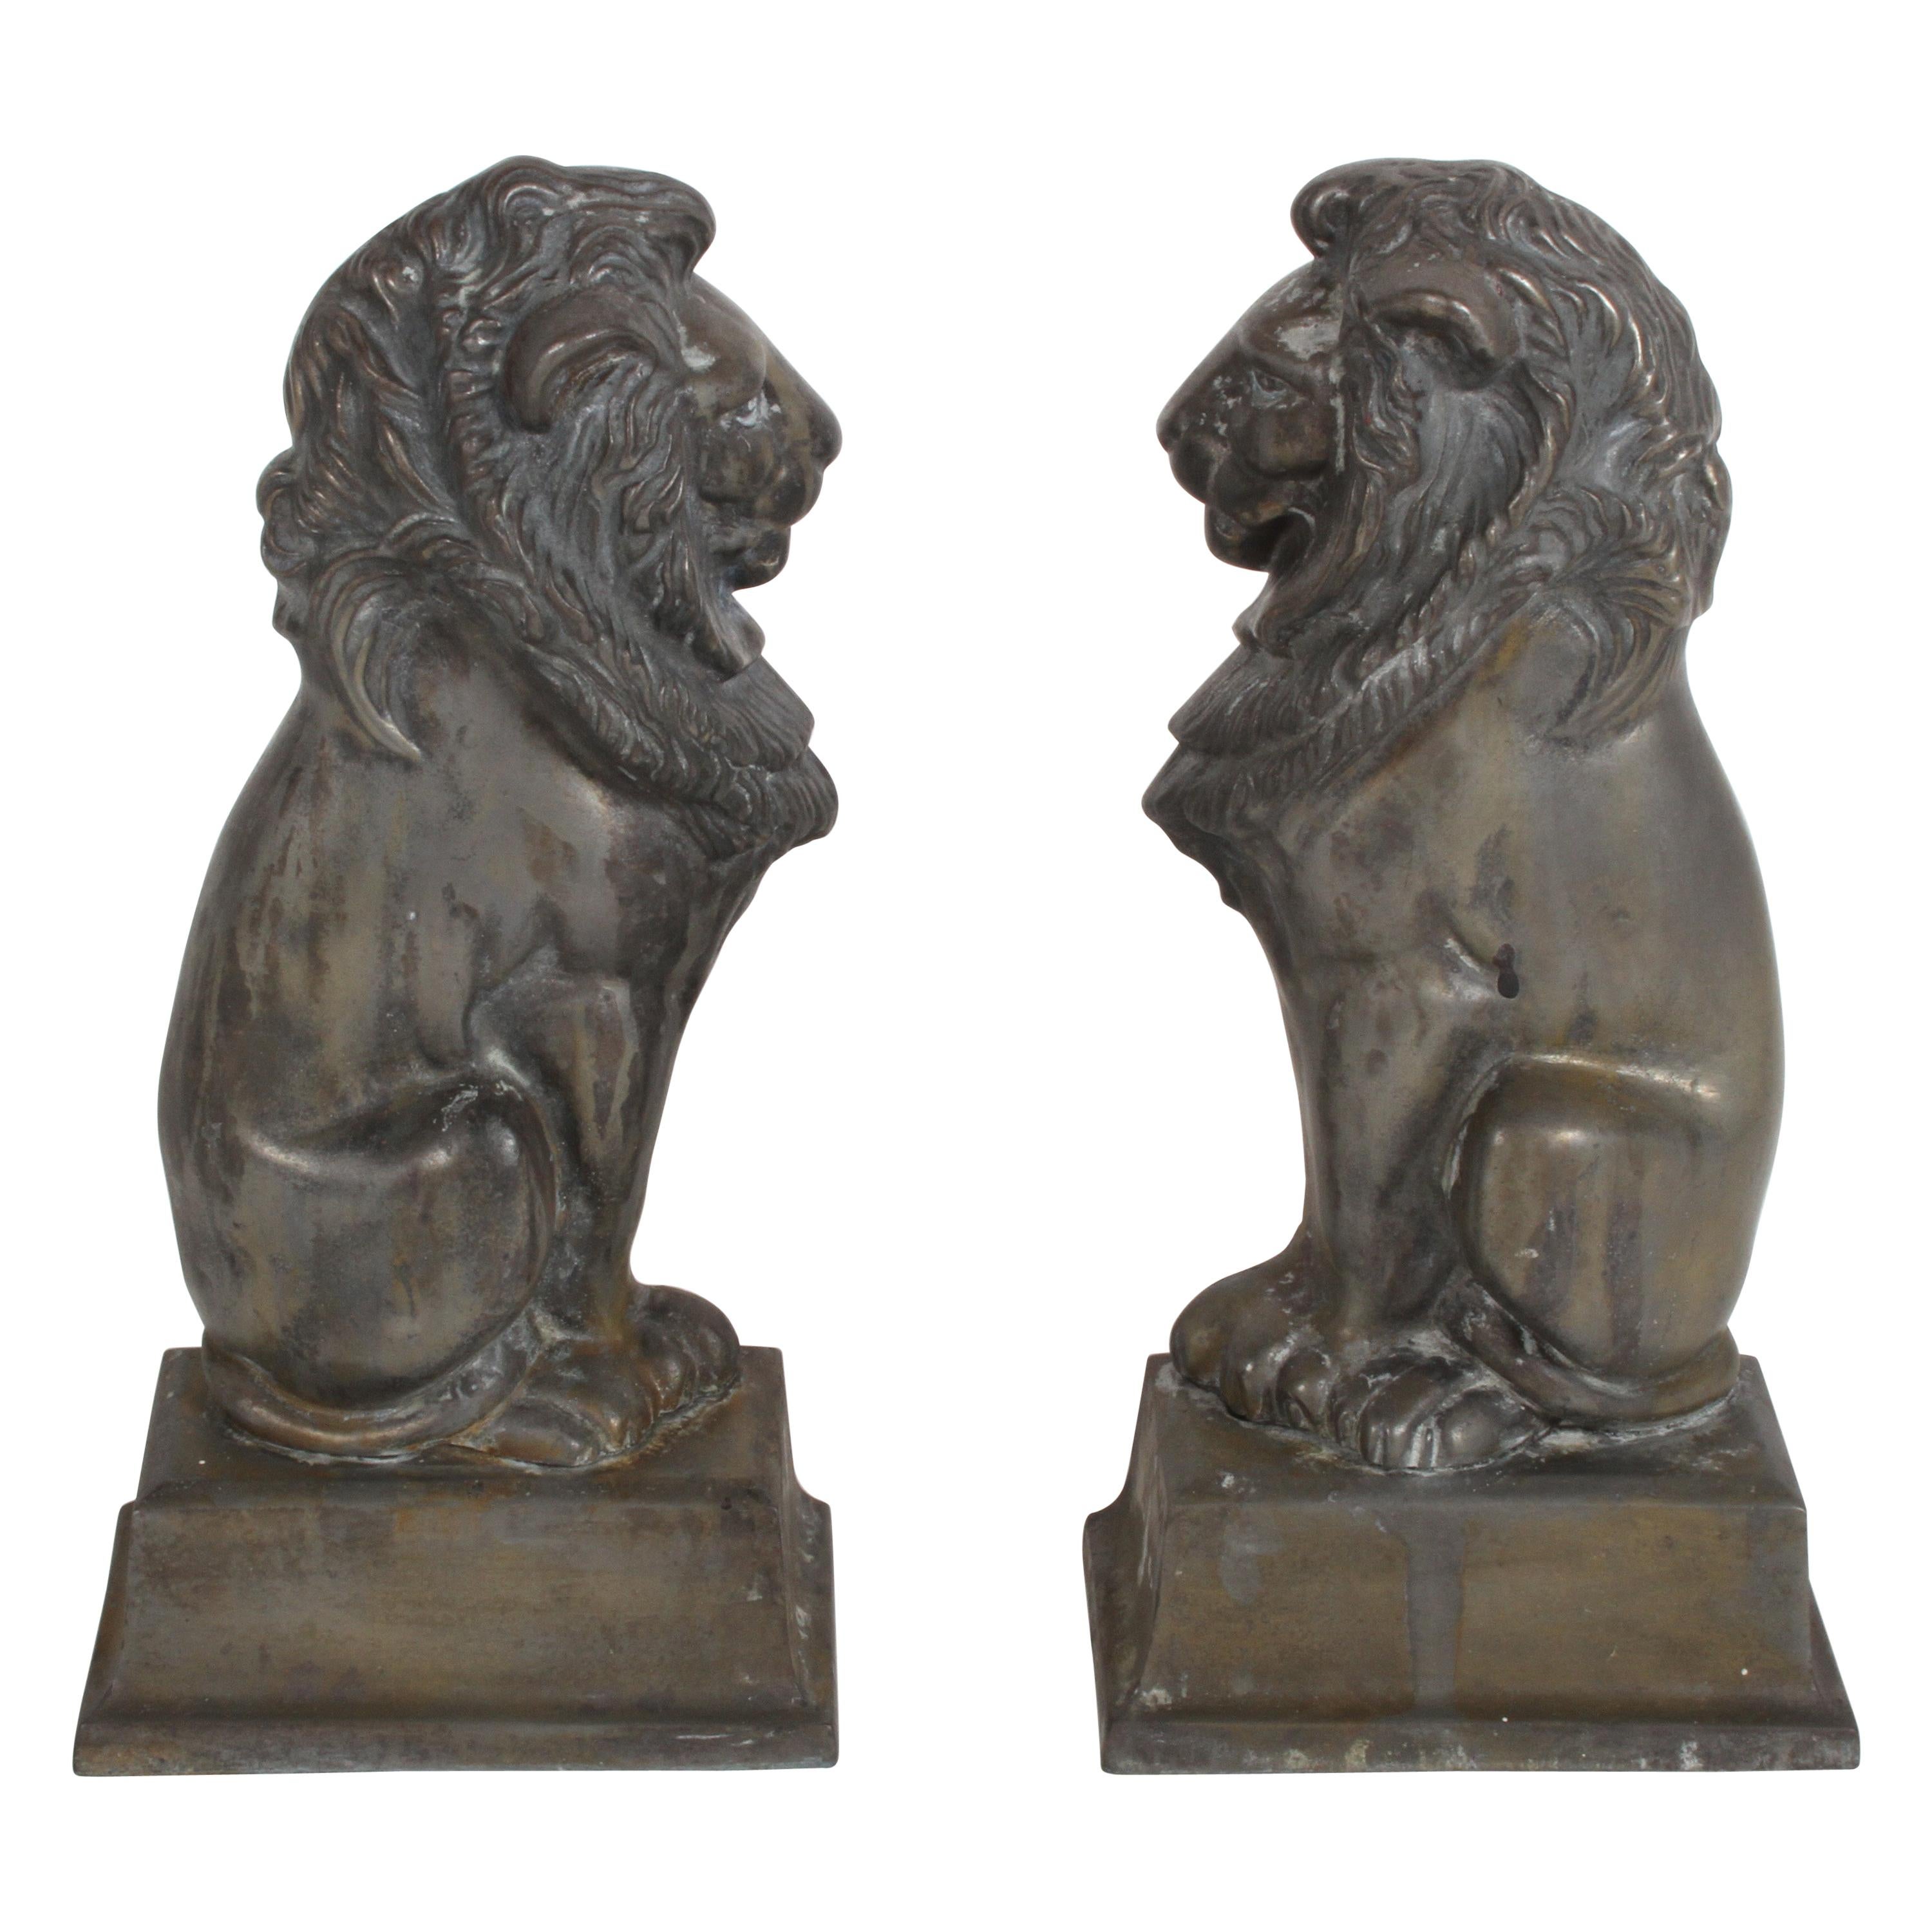 Pair of Iron Andirons or Fire Dogs Modeled as Lions after Artist Alfred Stevens